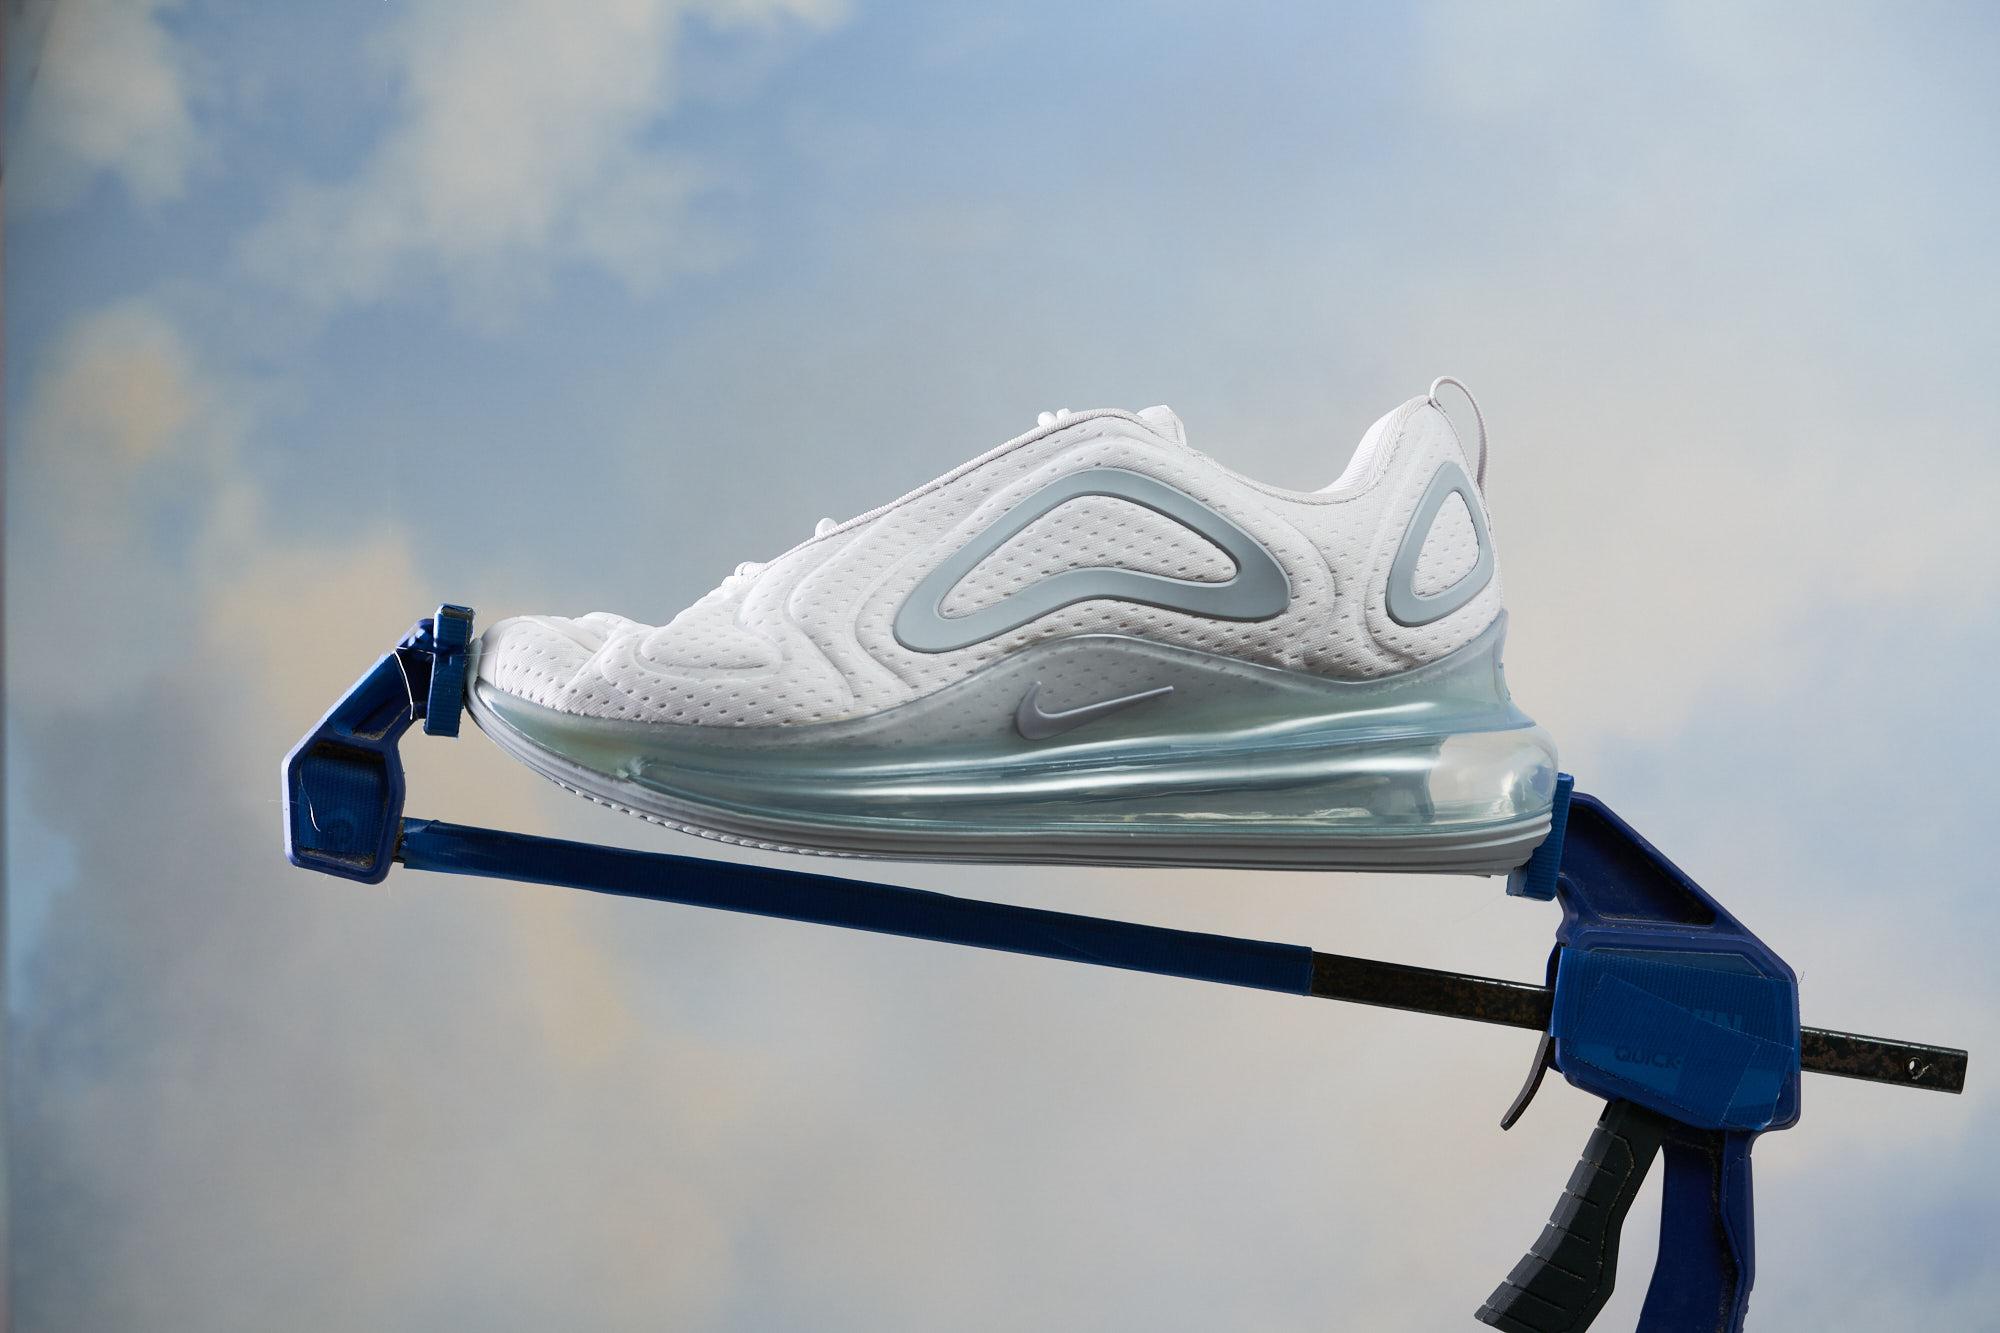 Nike Air Max 720 Review: Wearing the tallest Air Max ever